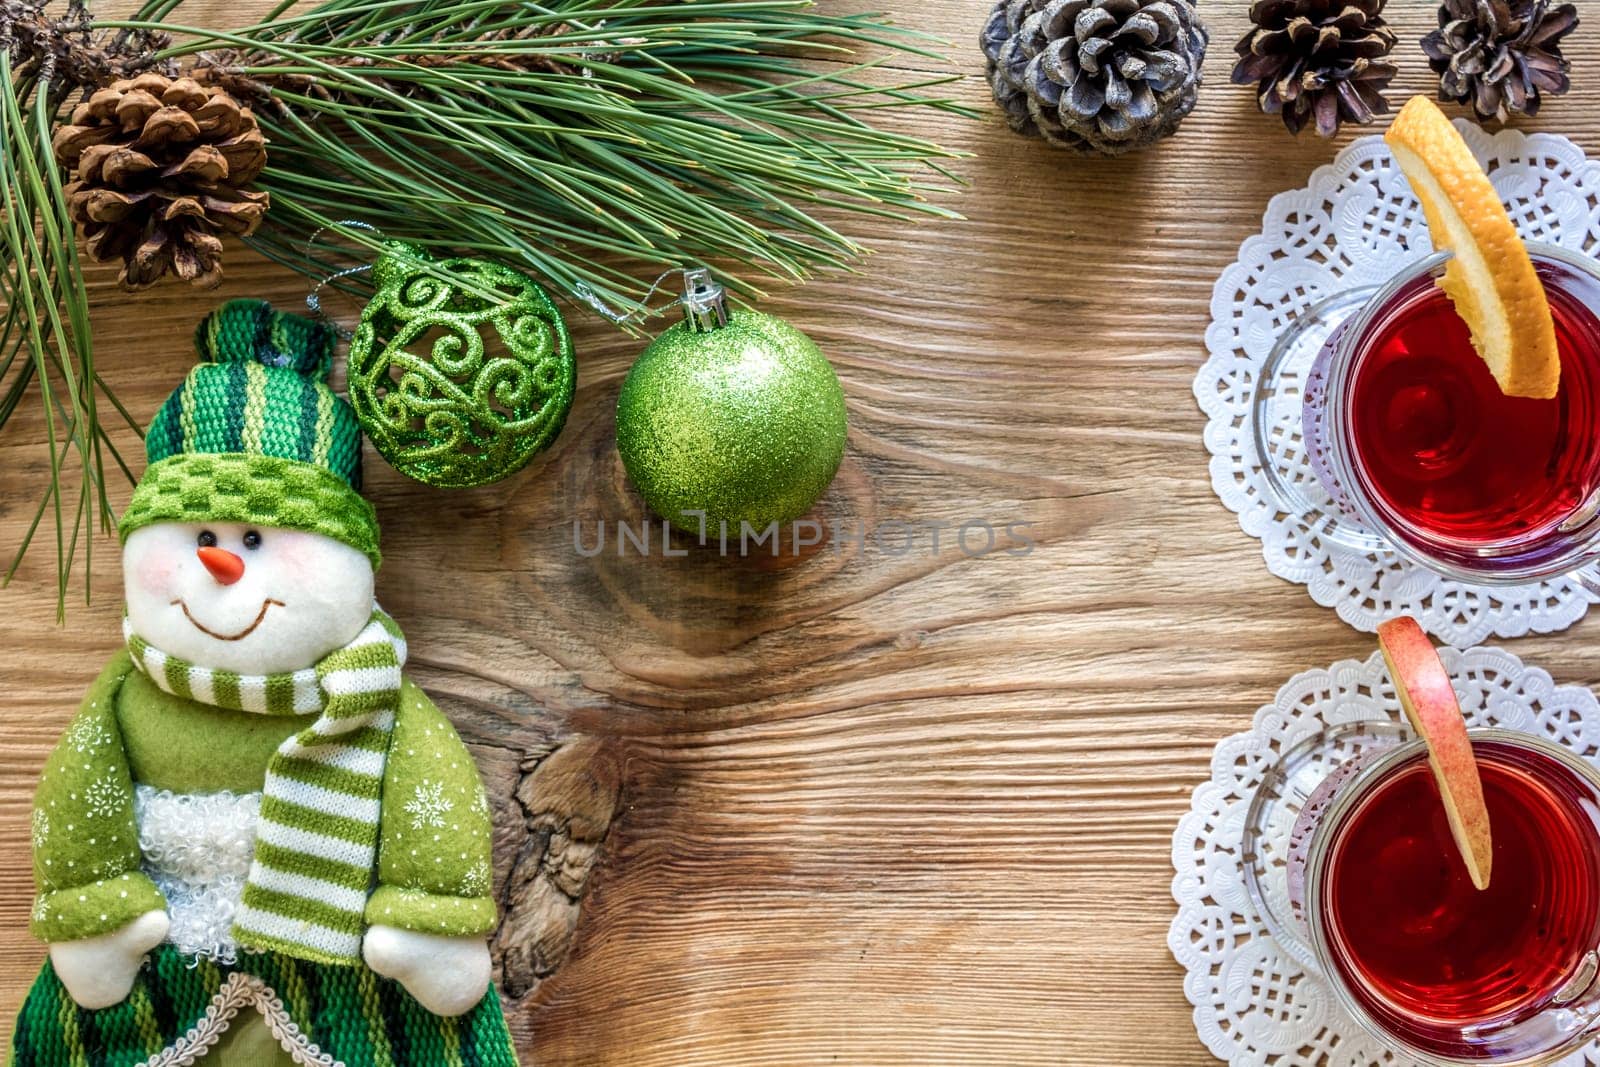 Hot mulled wine with spices on wooden background. Christmas tree branches, gifts and cones. Flat lay, copy space, top view. Holidays.